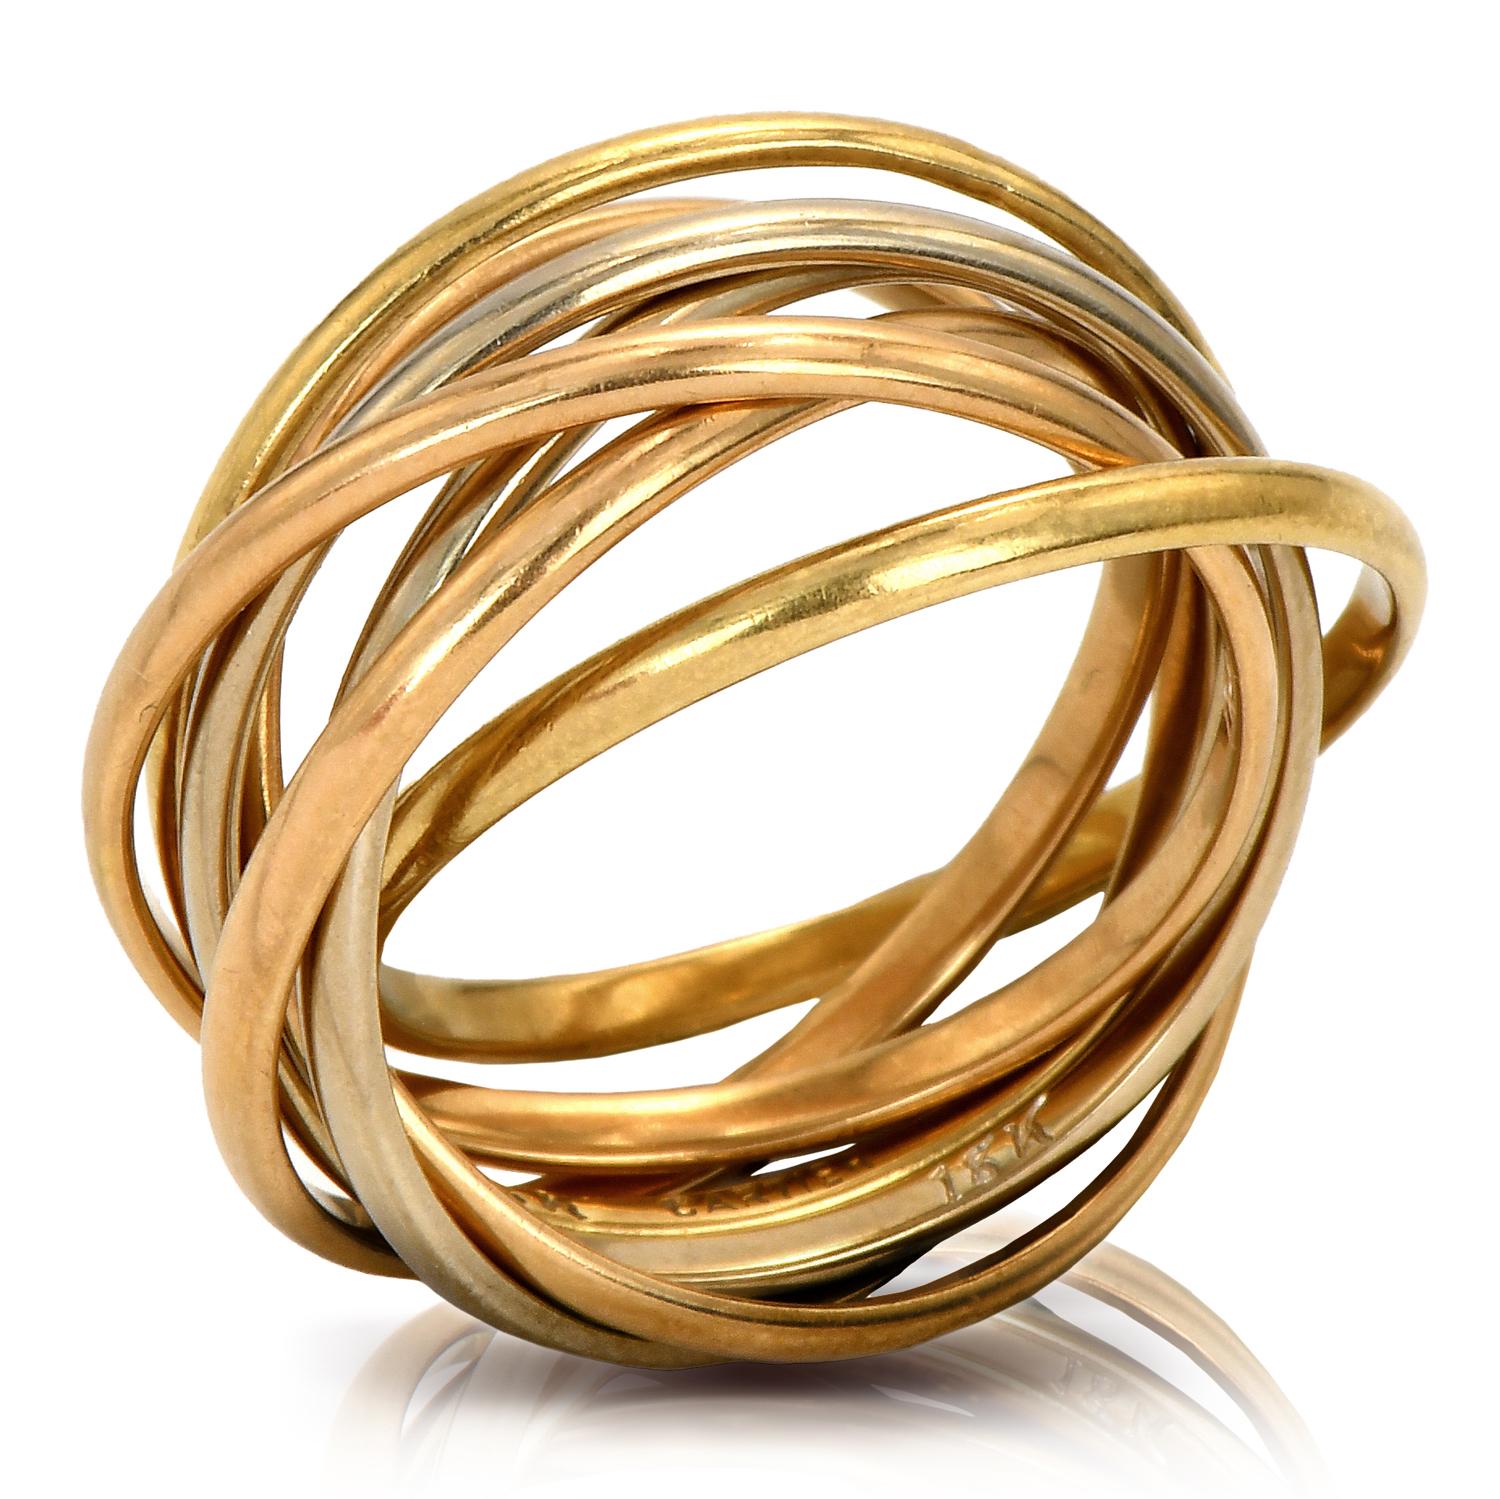 This is the Classic Trinity de Cartier with seven rolling bands ring, which is the epitome of elegance and timelessness.

Coming from Cartier's imagination since 192, it has movable bands made of 18K yellow gold, white gold, and rose gold. All